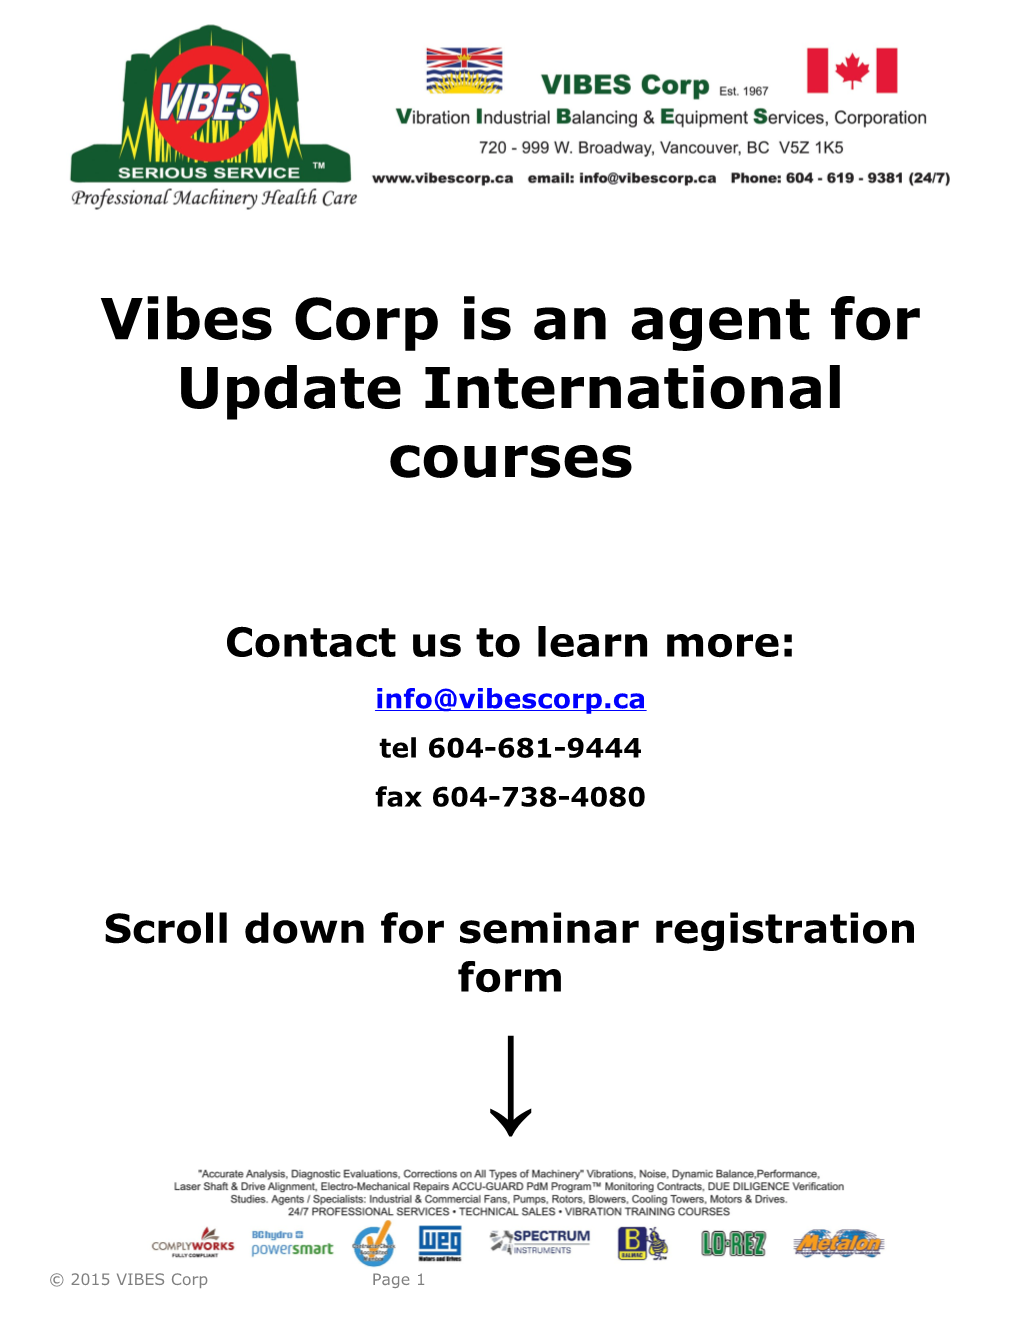 Vibes Corp Is an Agent for Update International Courses